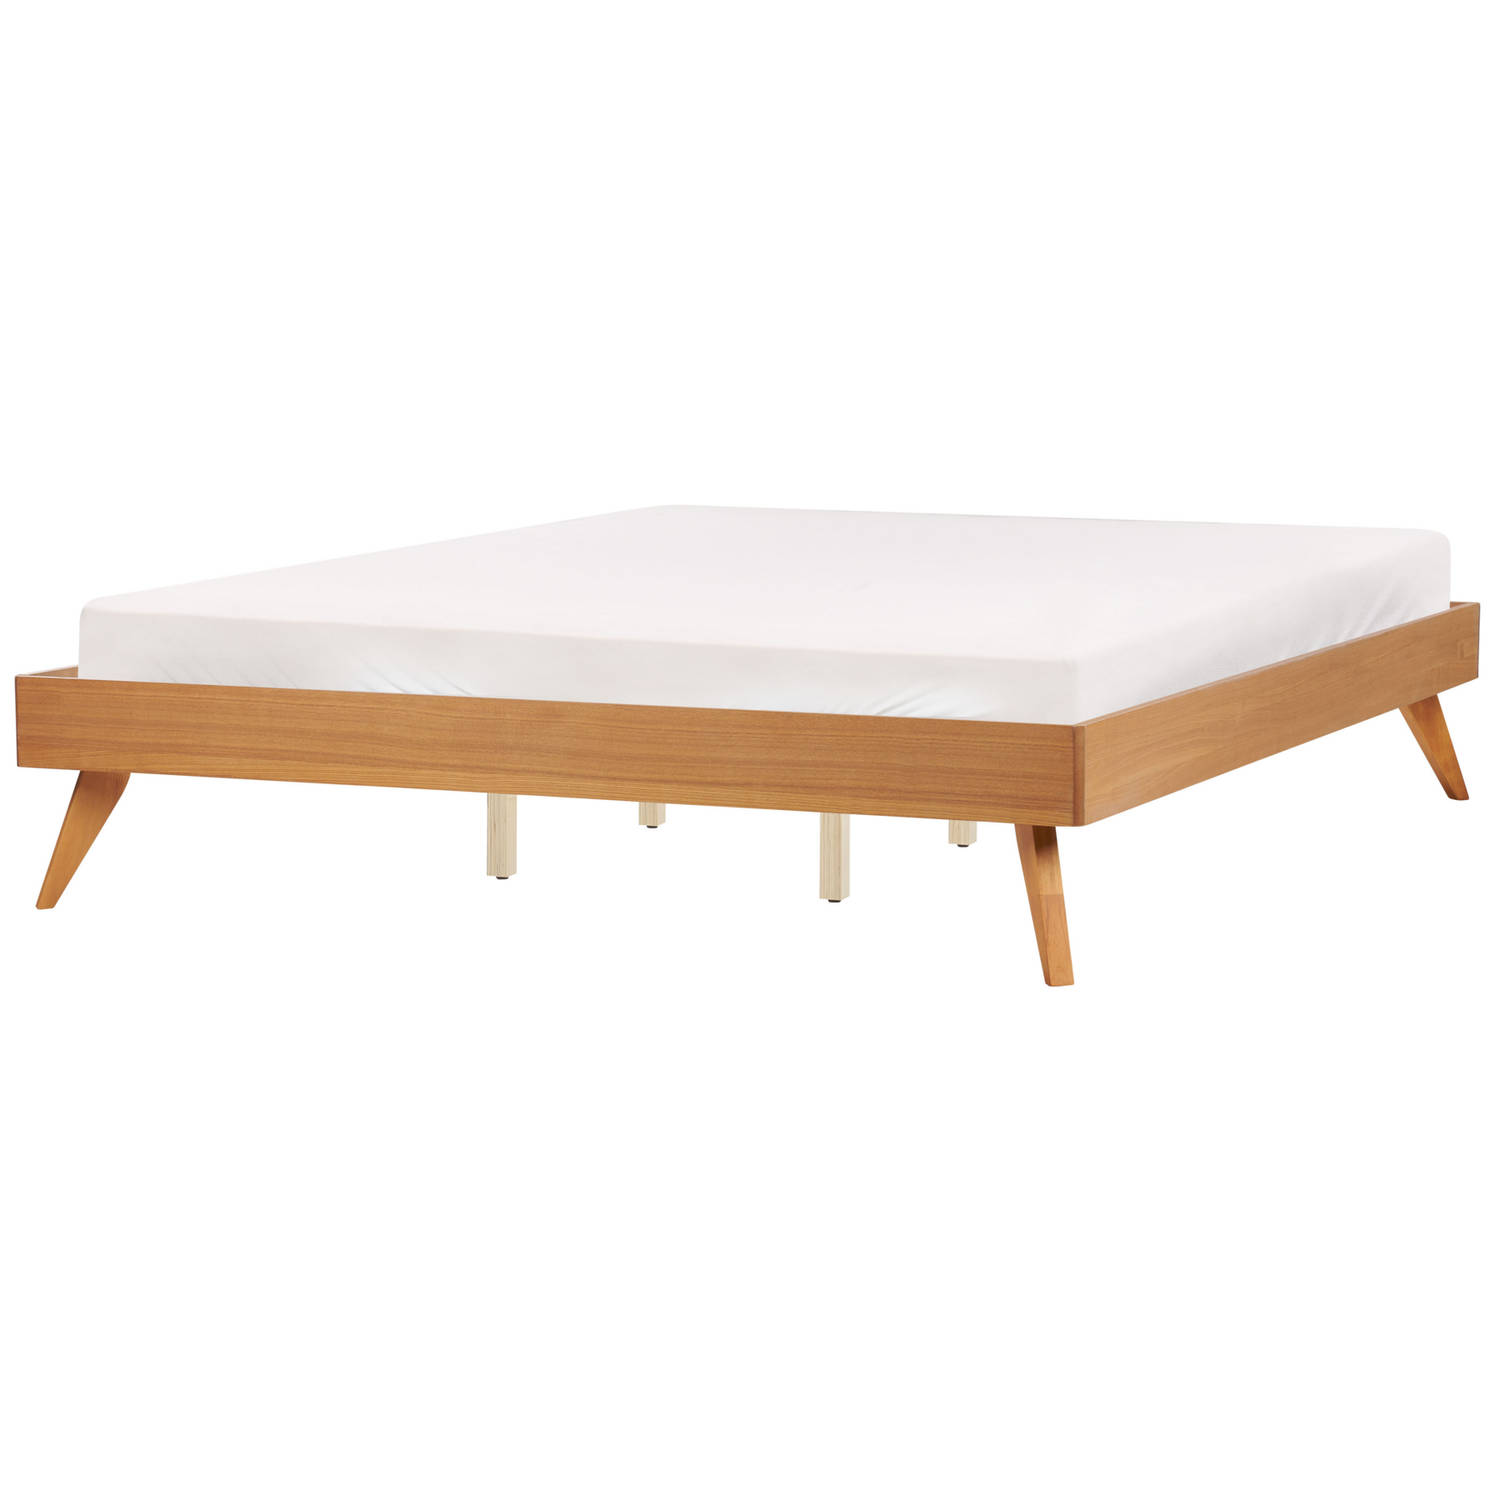 BERRIC - Tweepersoonsbed - Lichthout - 180 x 200 cm - MDF